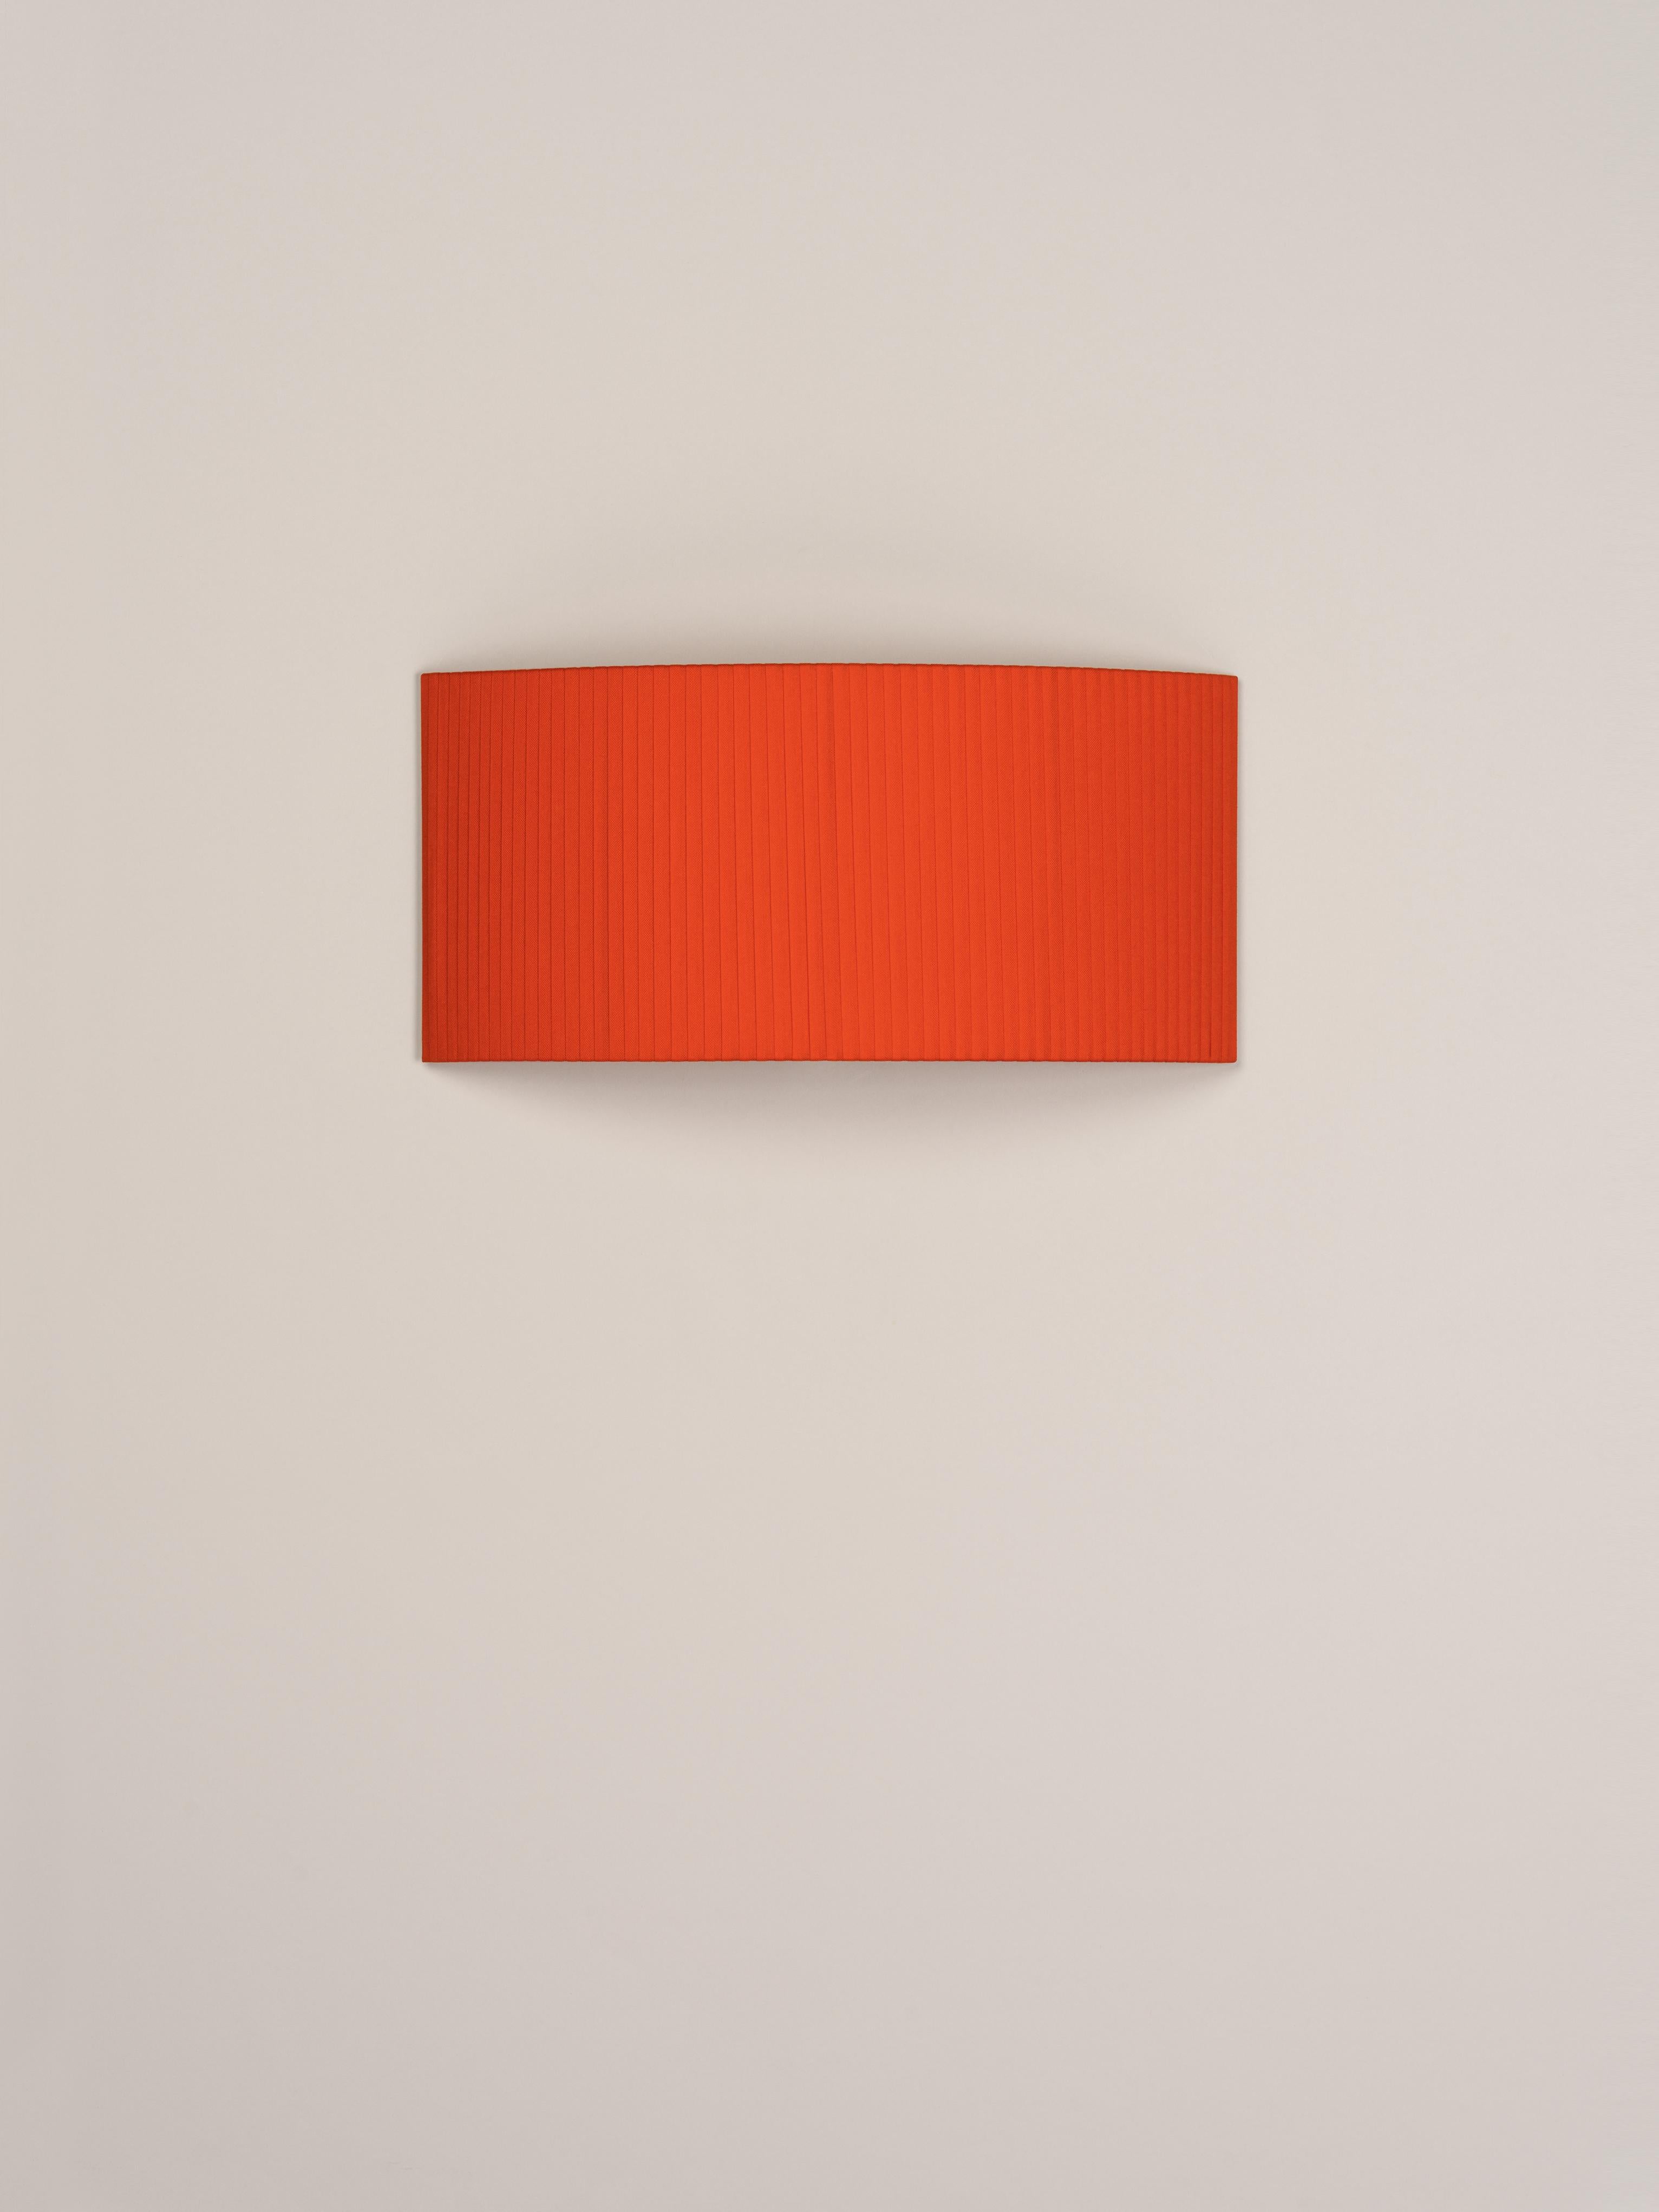 Red Comodín Rectangular wall lamp by Santa & Cole
Dimensions: D 50 x W 13 x H 24 cm
Materials: Metal, ribbon.

This minimalist wall lamp humanises neutral spaces with its colourful and functional sobriety. The shade is fondly hand-ribboned,